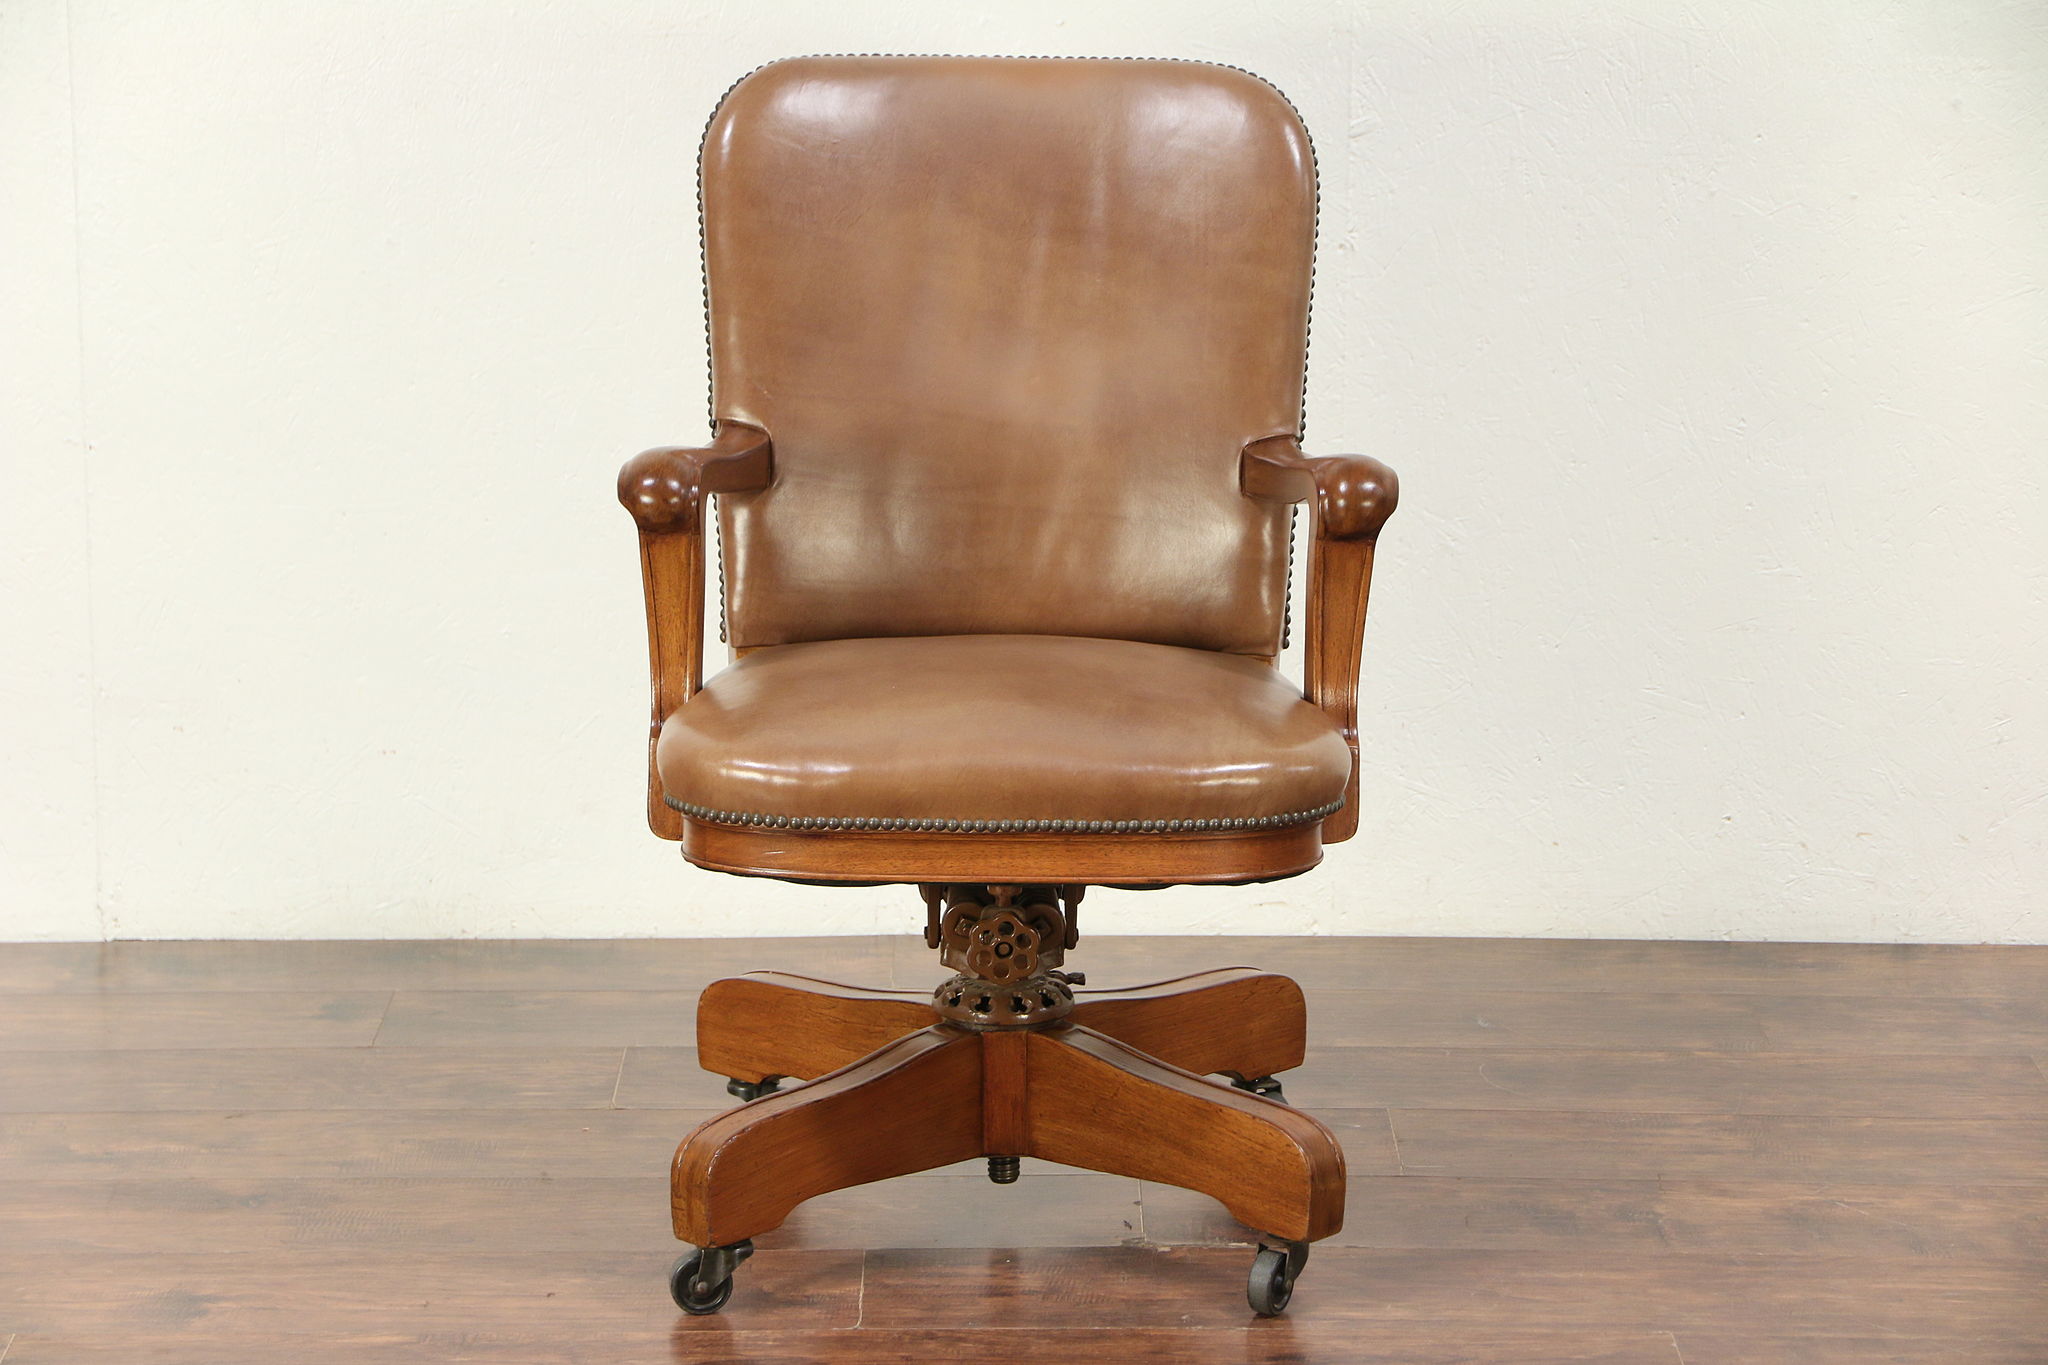 Sold Leather Swivel Adjustable Antique Mahogany Desk Chair